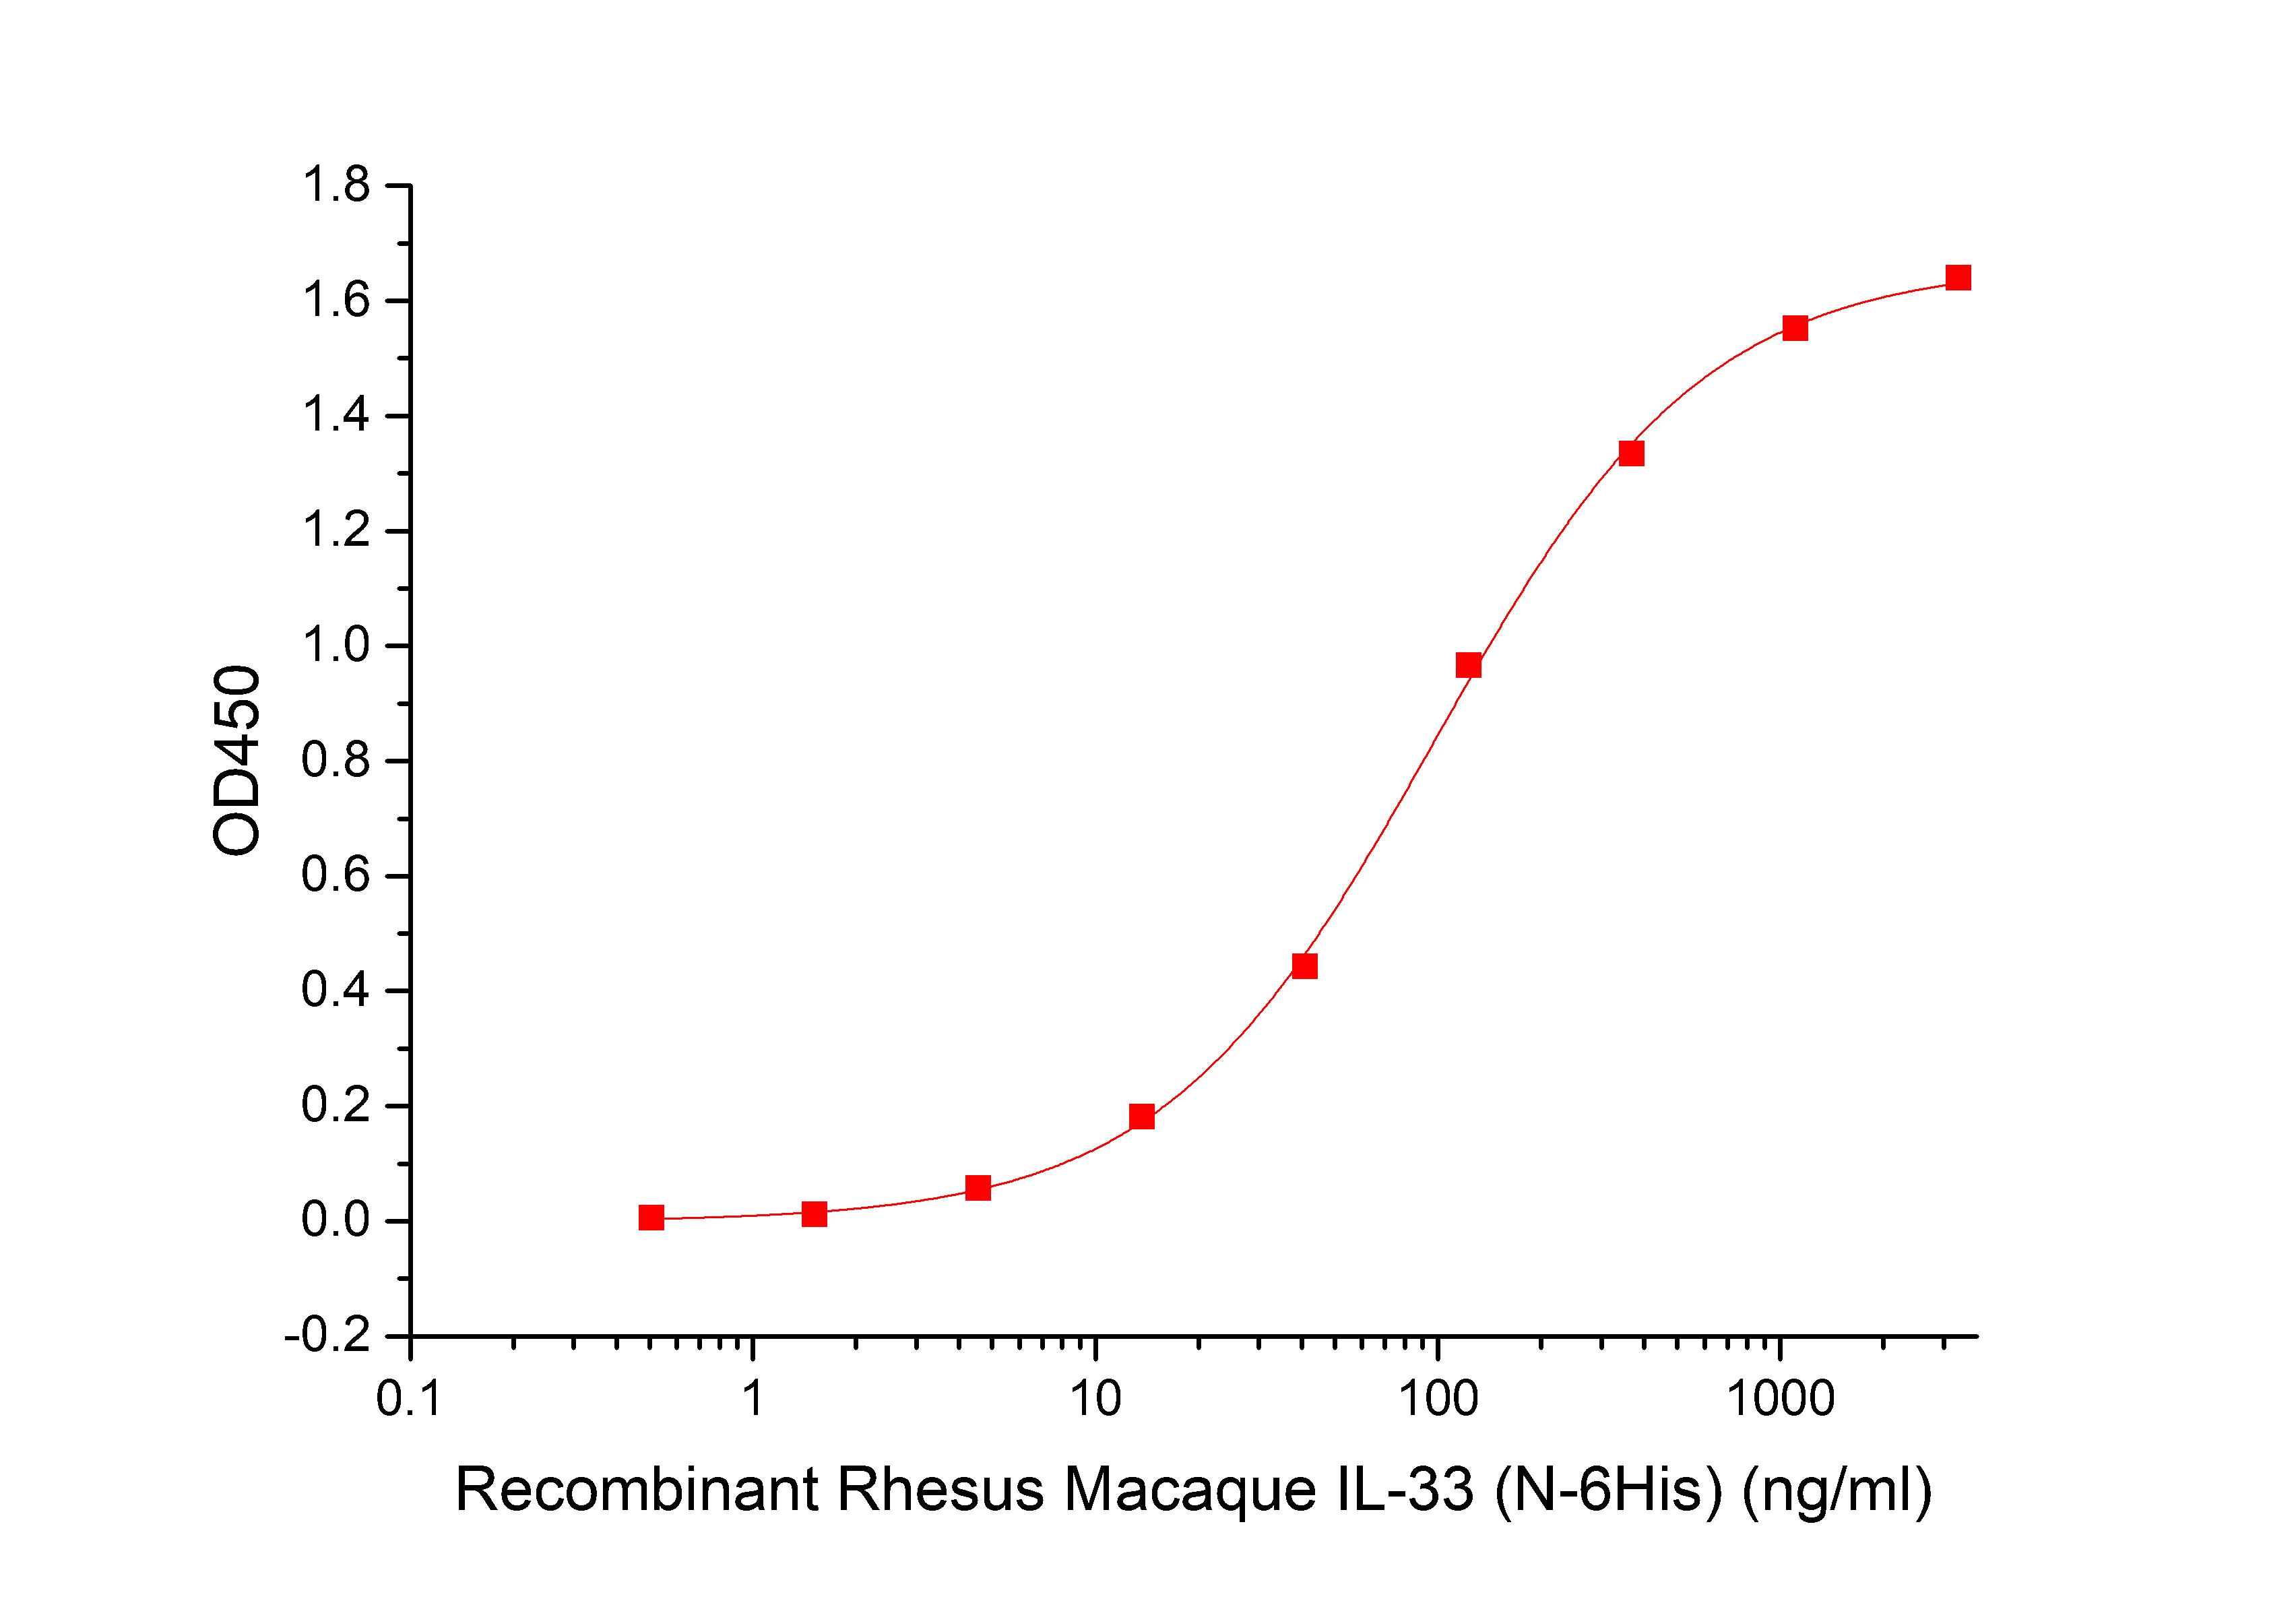 ST2/IL-1 RL1 Protein, Mouse, Recombinant (aa 27-337, His)